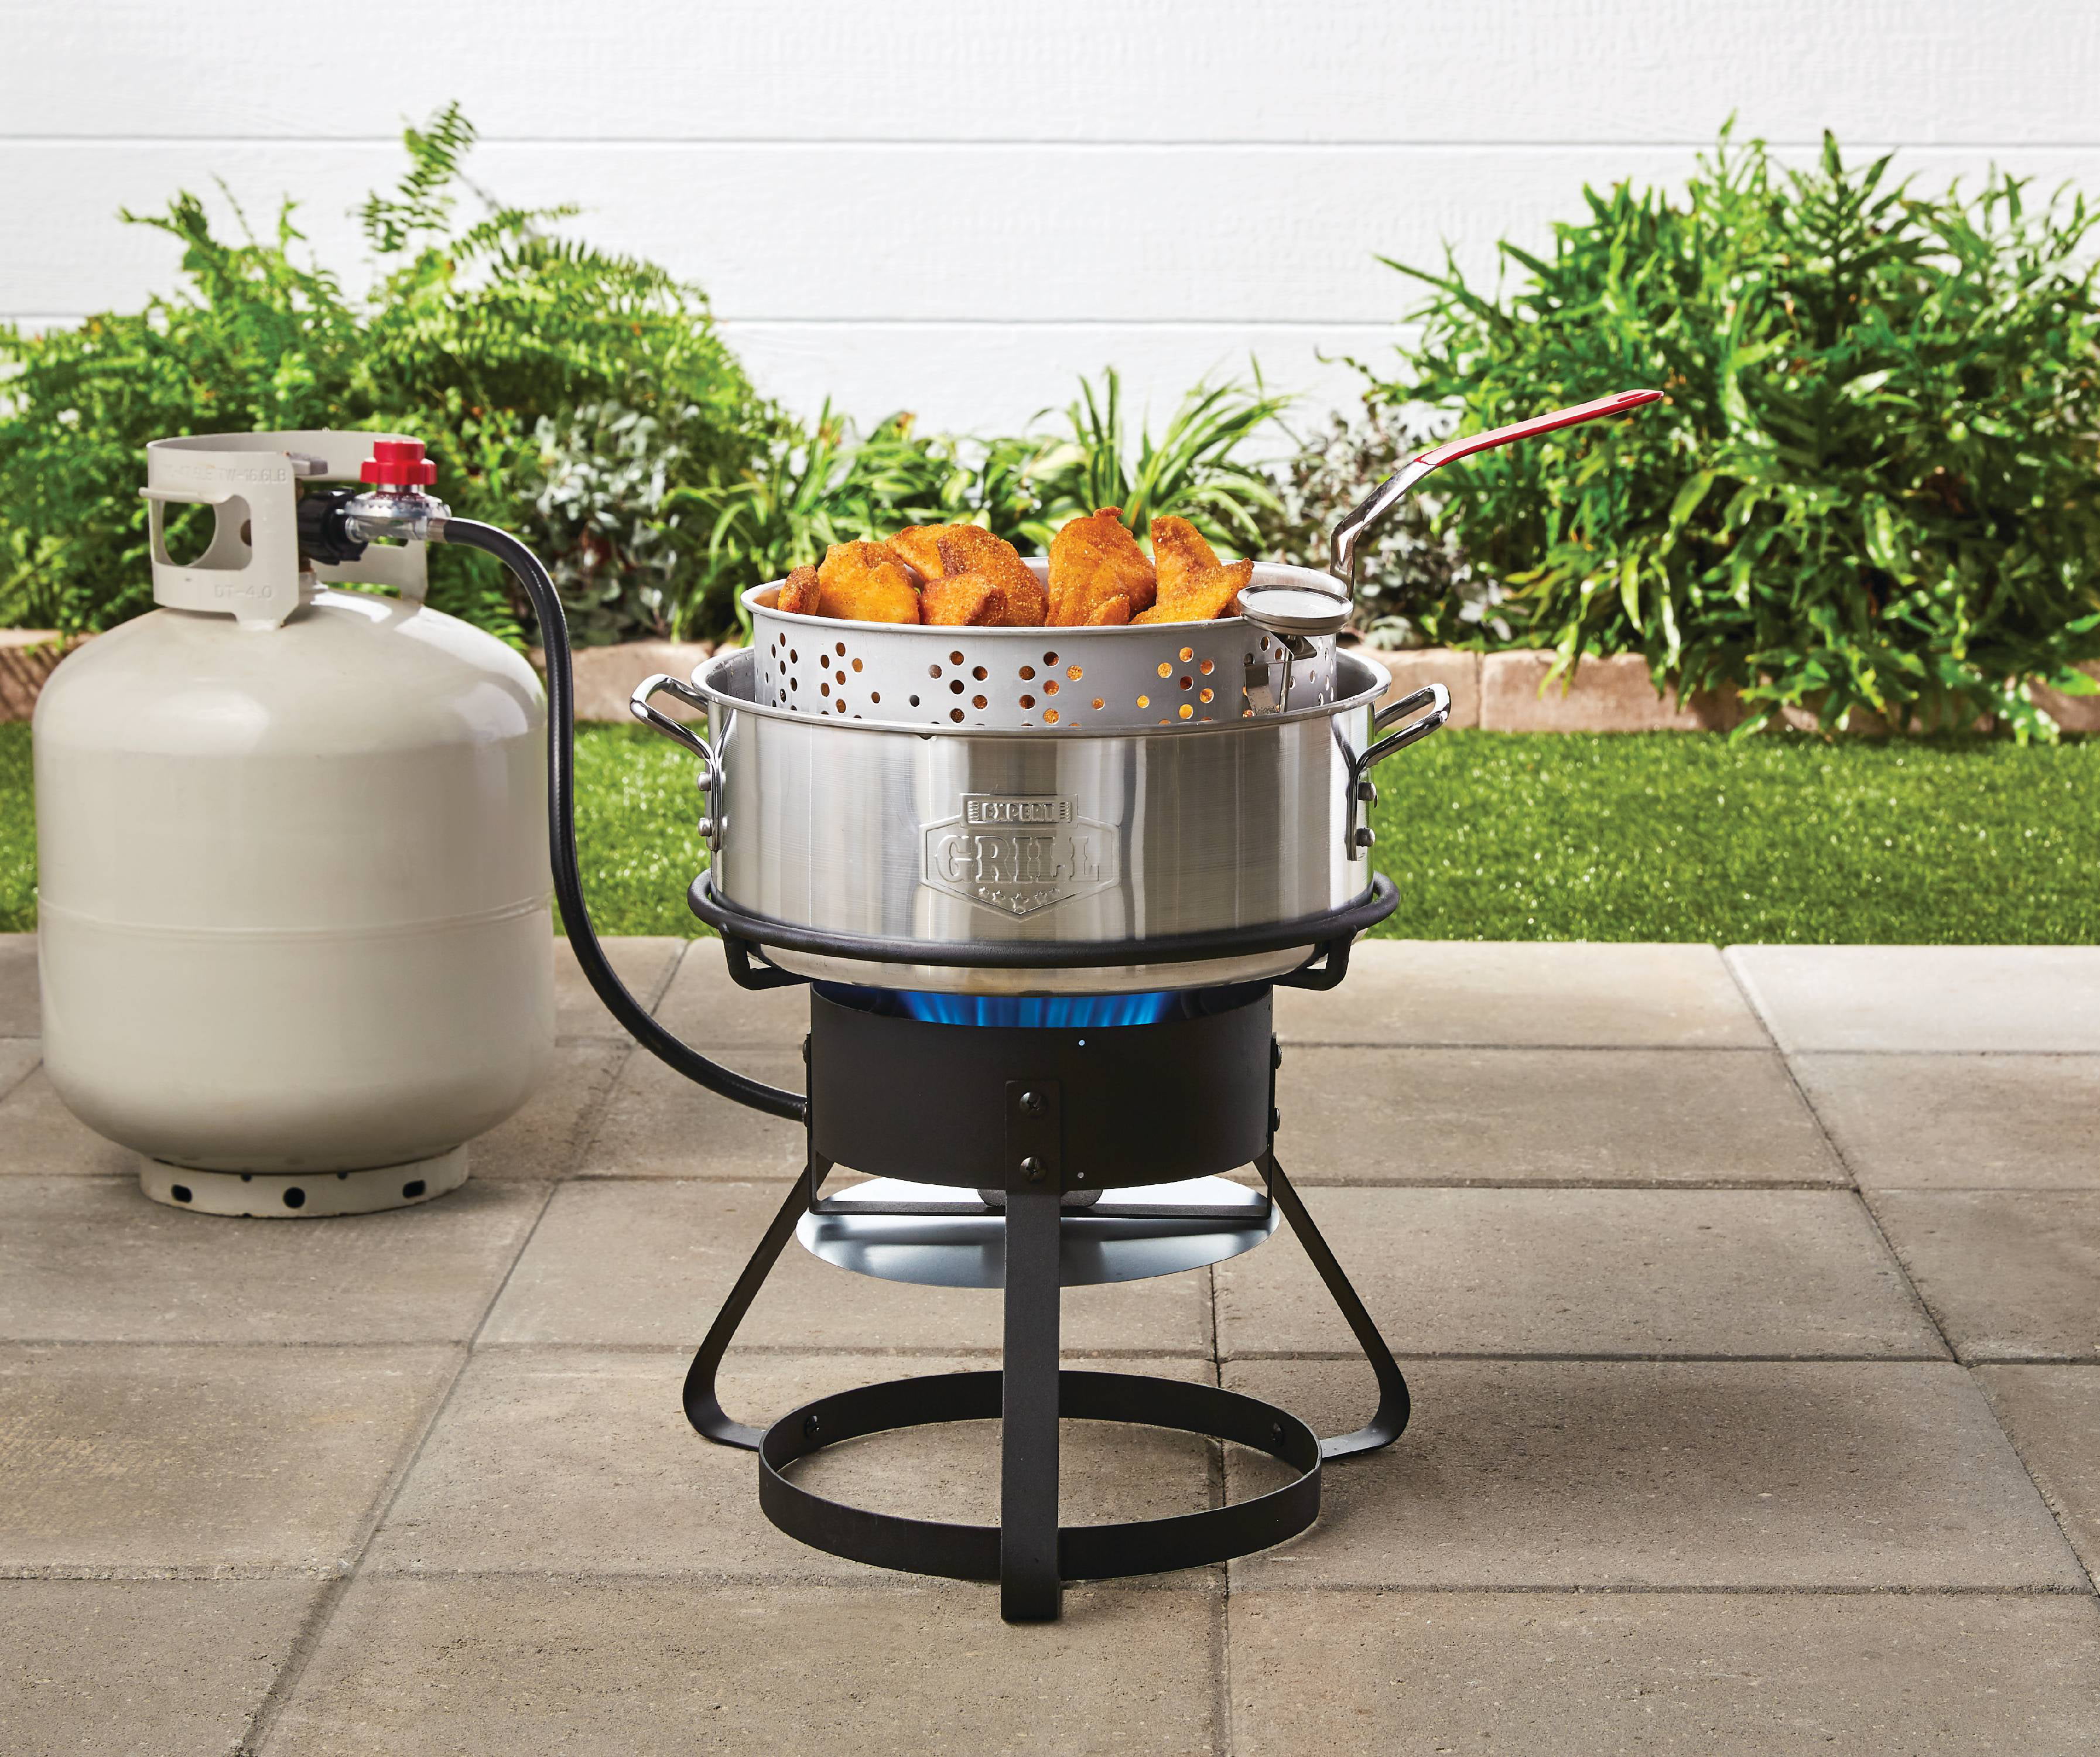 Outdoor Fryer Set Gas Stove Propane Stand Side Table Pot and Basket Fish Wings 